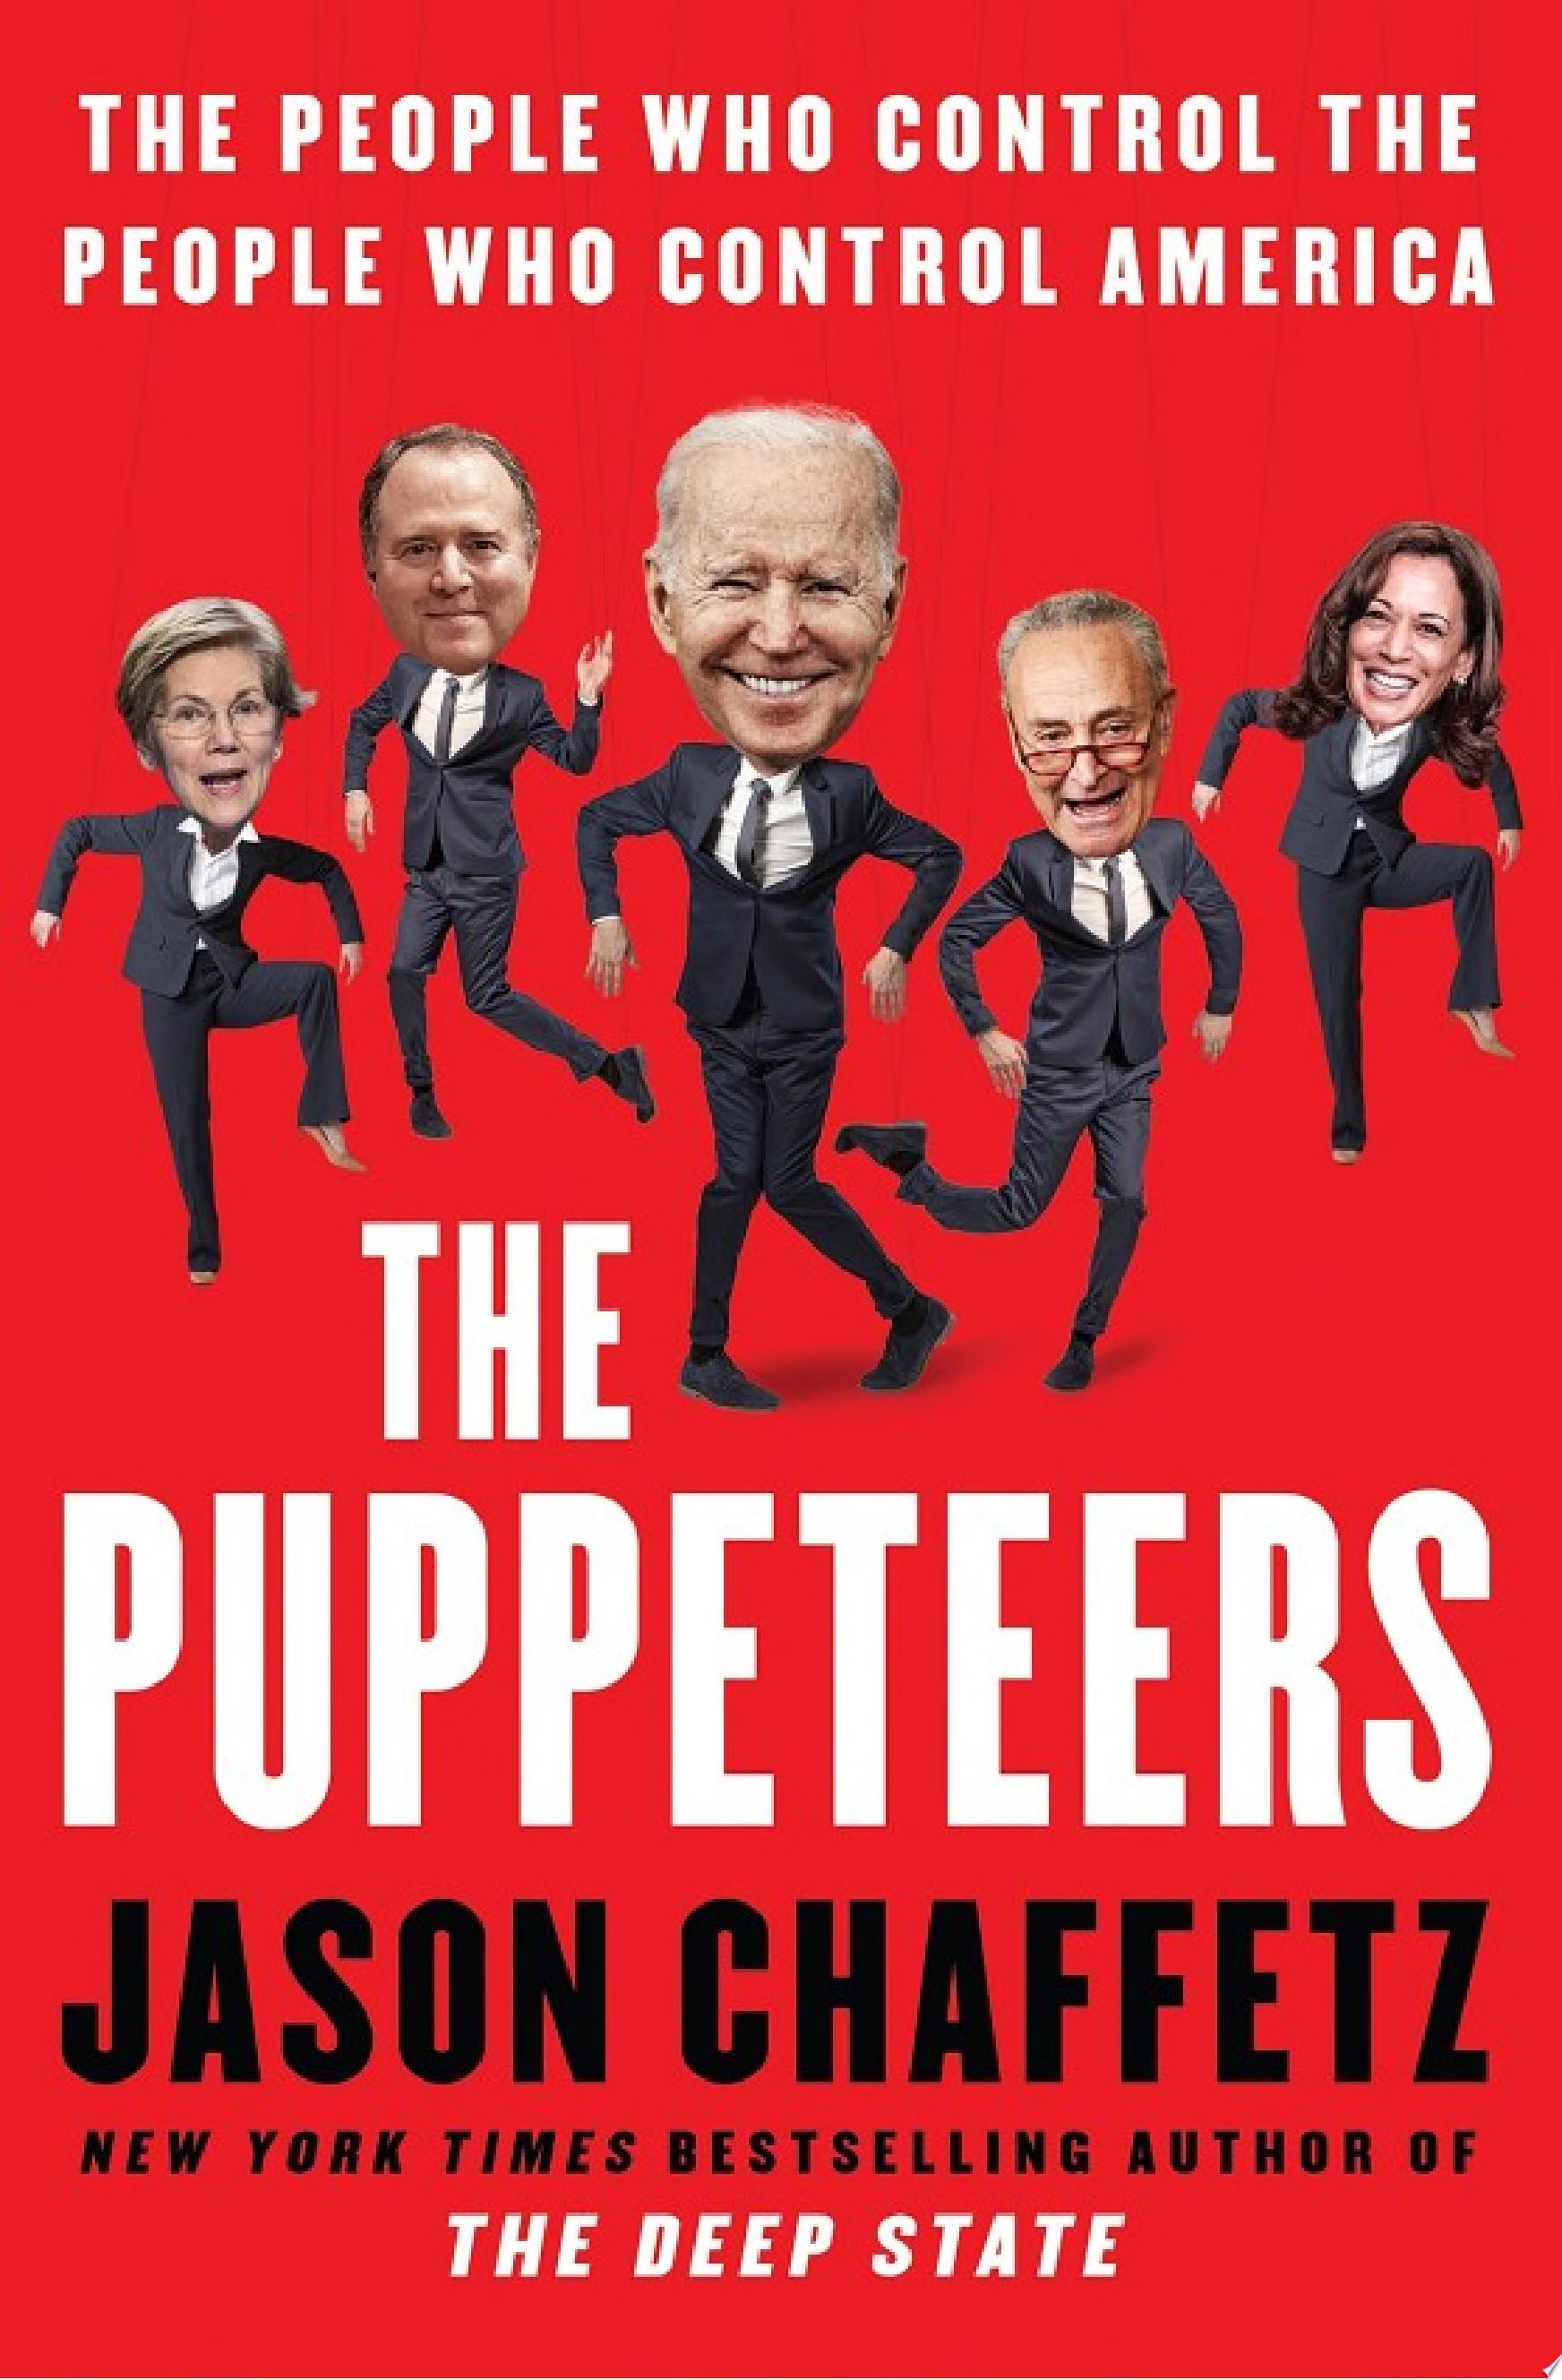 Image for "The Puppeteers"